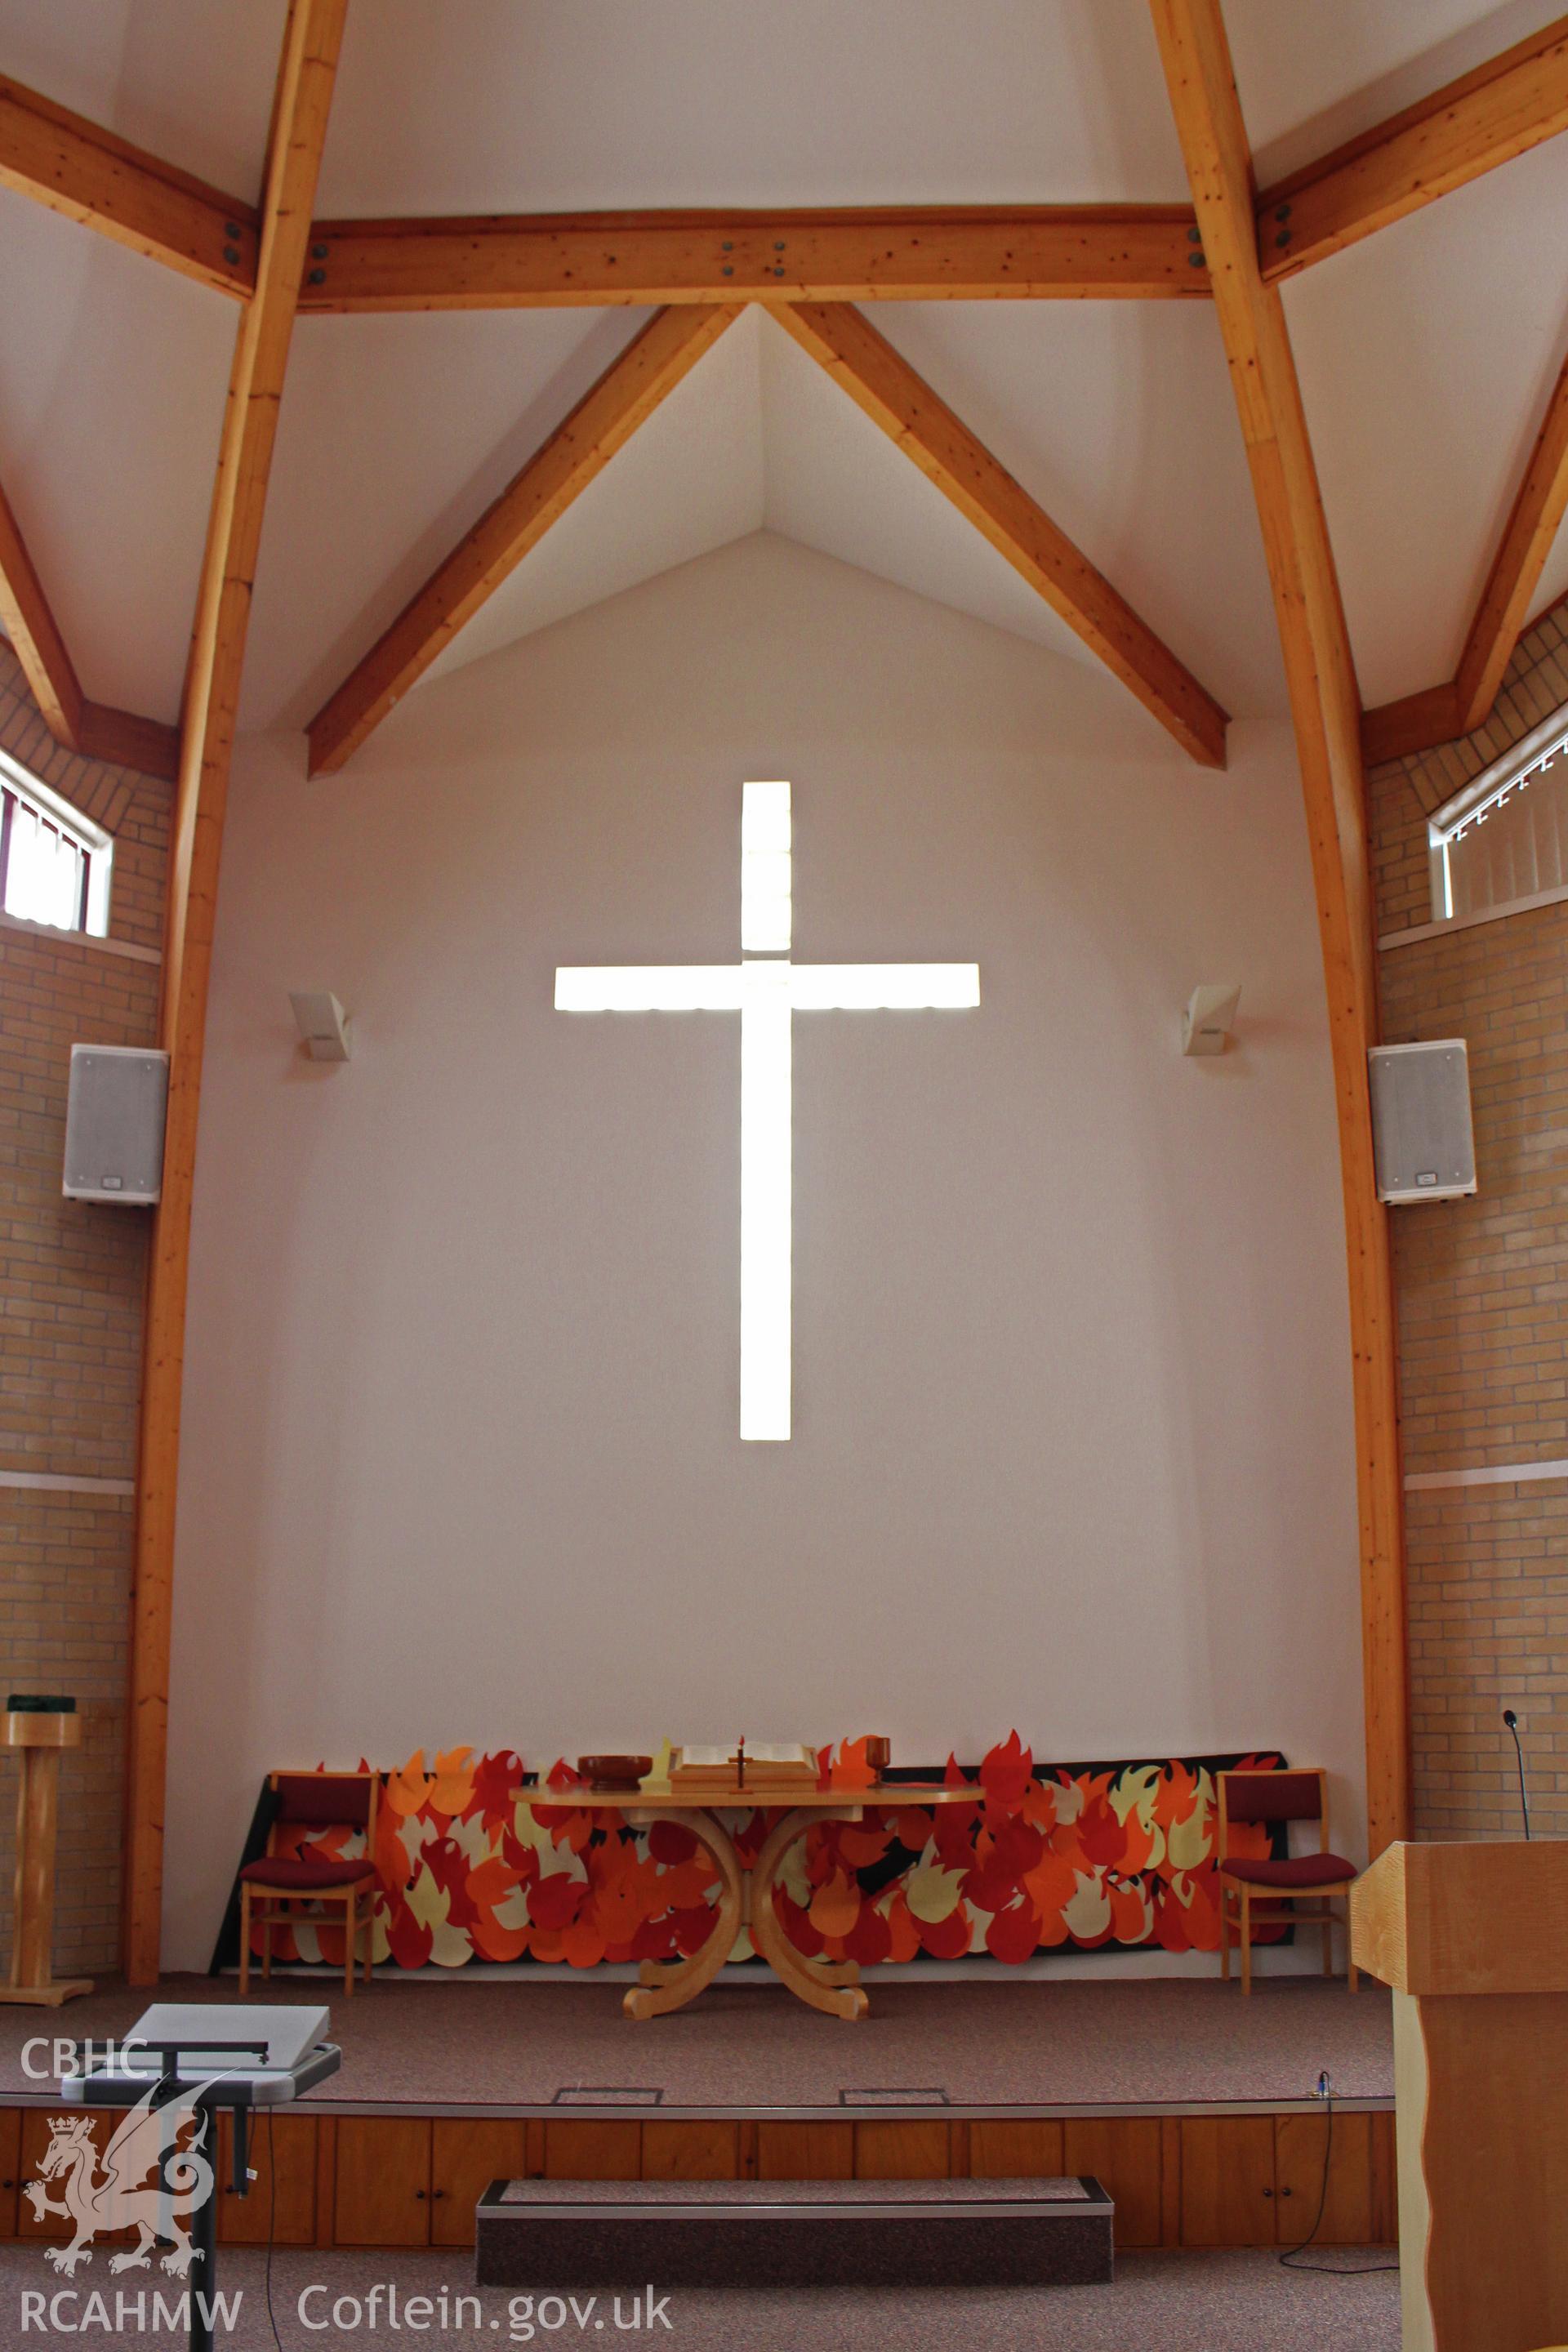 Manselton URC Chapel, Swansea, detail of south-east bay with cruciform window and communion table